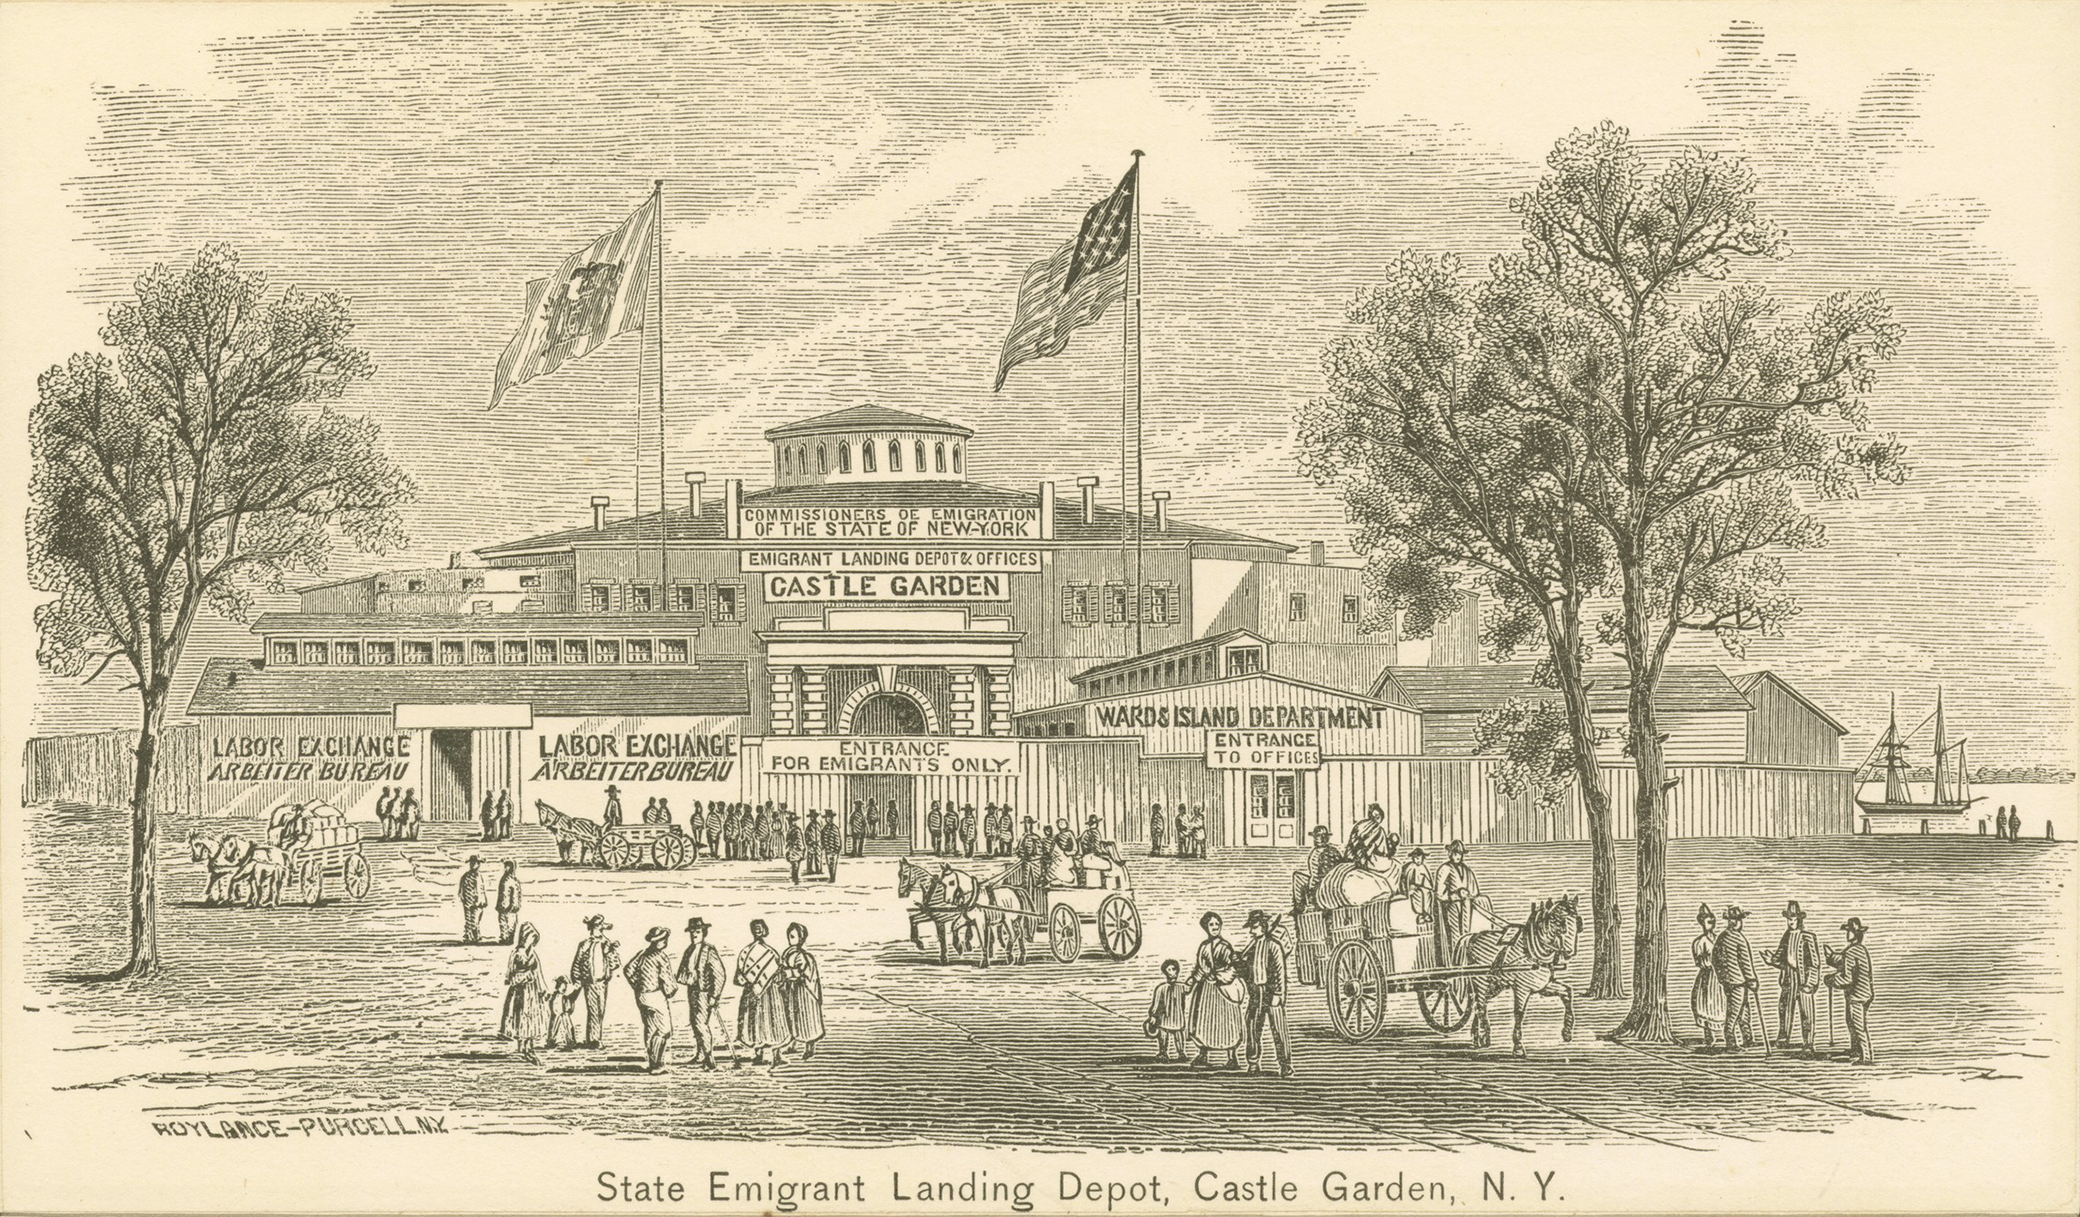 State Emigrant Landing Depot, Castle Garden, New York, 1861. The New York Public Library, The Miriam and Ira D. Wallach Division of Art, Prints and Photographs: Print Collection.